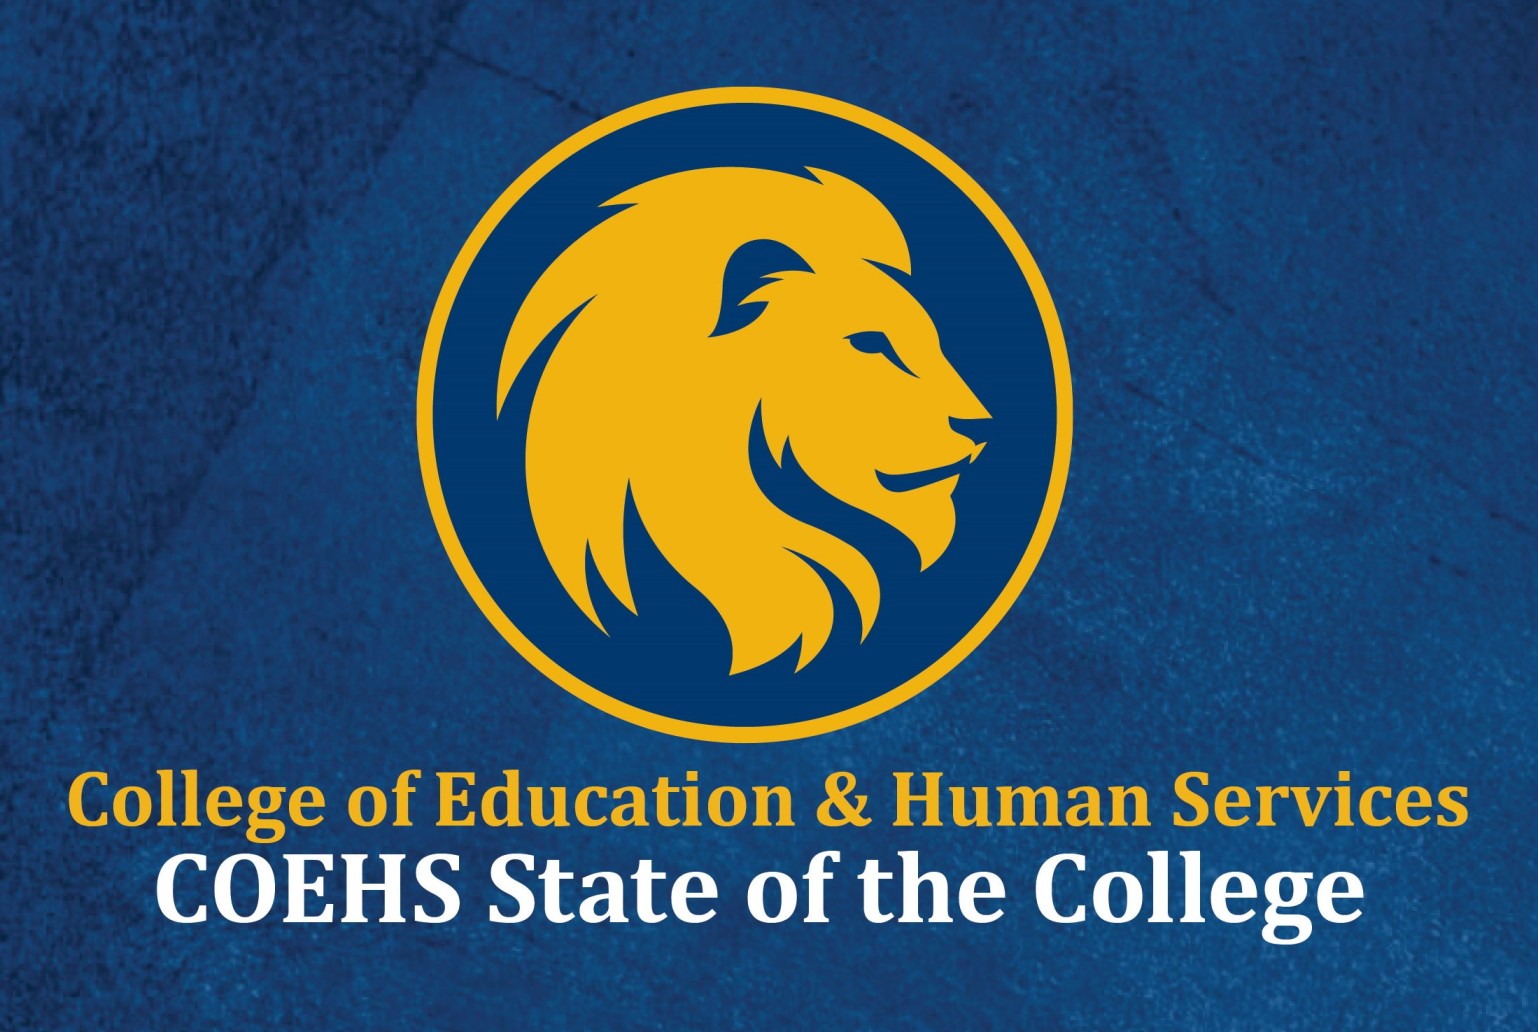 COEHS State of the College